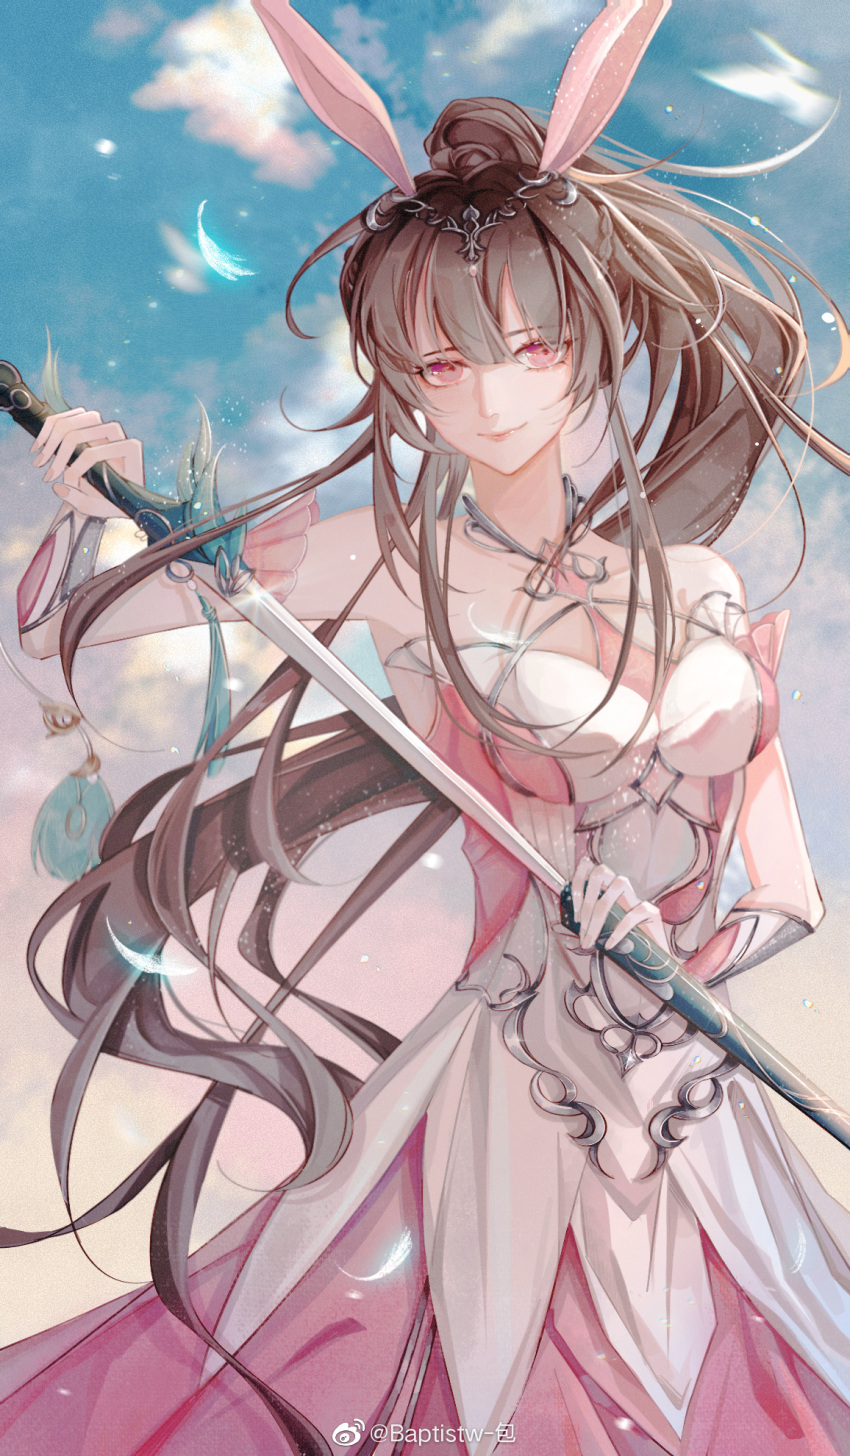 1girl animal_ears blue_sky brown_hair clouds douluo_dalu dress feathers highres pink_dress pink_eyes ponytail rabbit_ears sheathing sky sword weapon xiao_wu_(douluo_dalu)